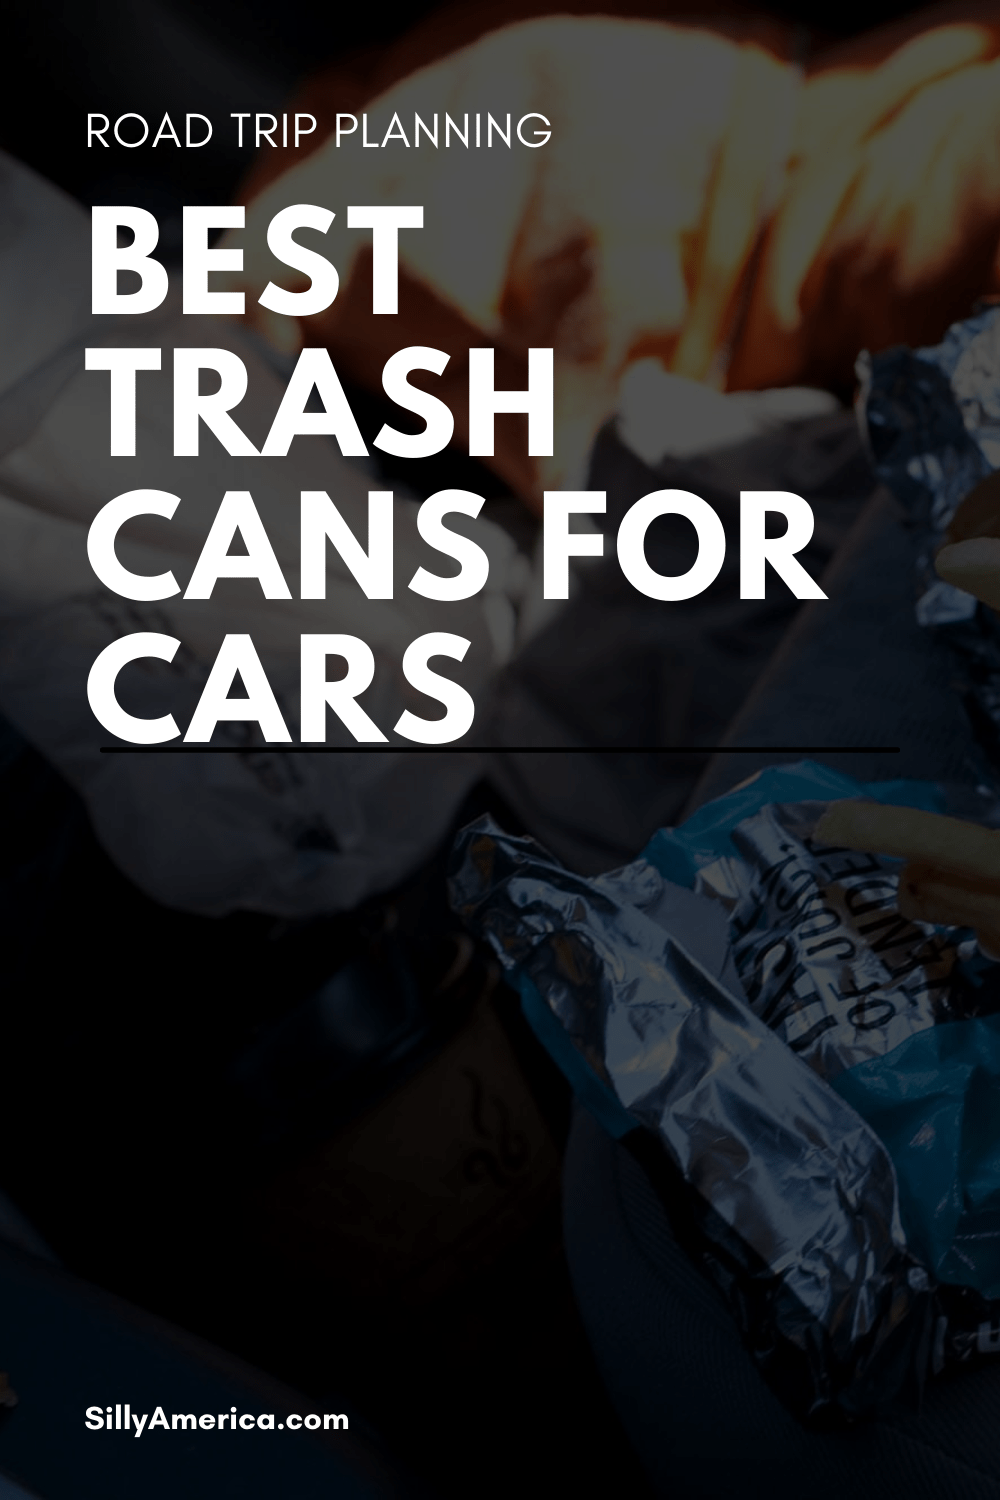 Cars can get messy...especially if you're spending days on end driving on a road trip. Fast food bags, napkins, gas station receipts, coffee cups, and more can start piling up. But you can help corral that clutter by picking out one of the best trash cans for cars that will keep your cabin organized and clean. A car garbage can is a great investment and definitely should be on your list of road trip essentials. #RoadTripEssentials #LongRoadTripEssentials #RoadTripEssentialsForCars